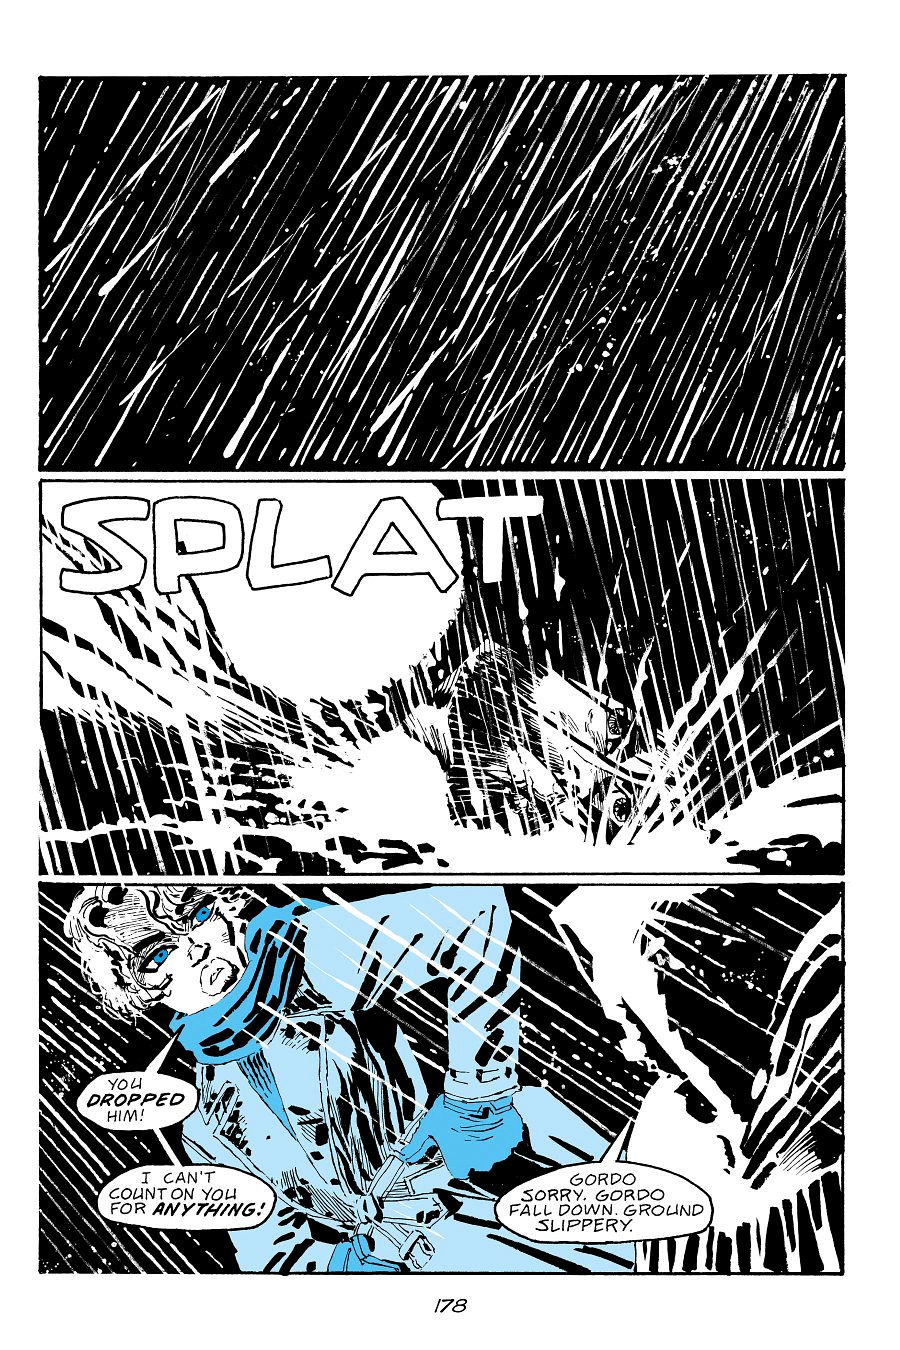 page 178 of sin city 7 hell and back